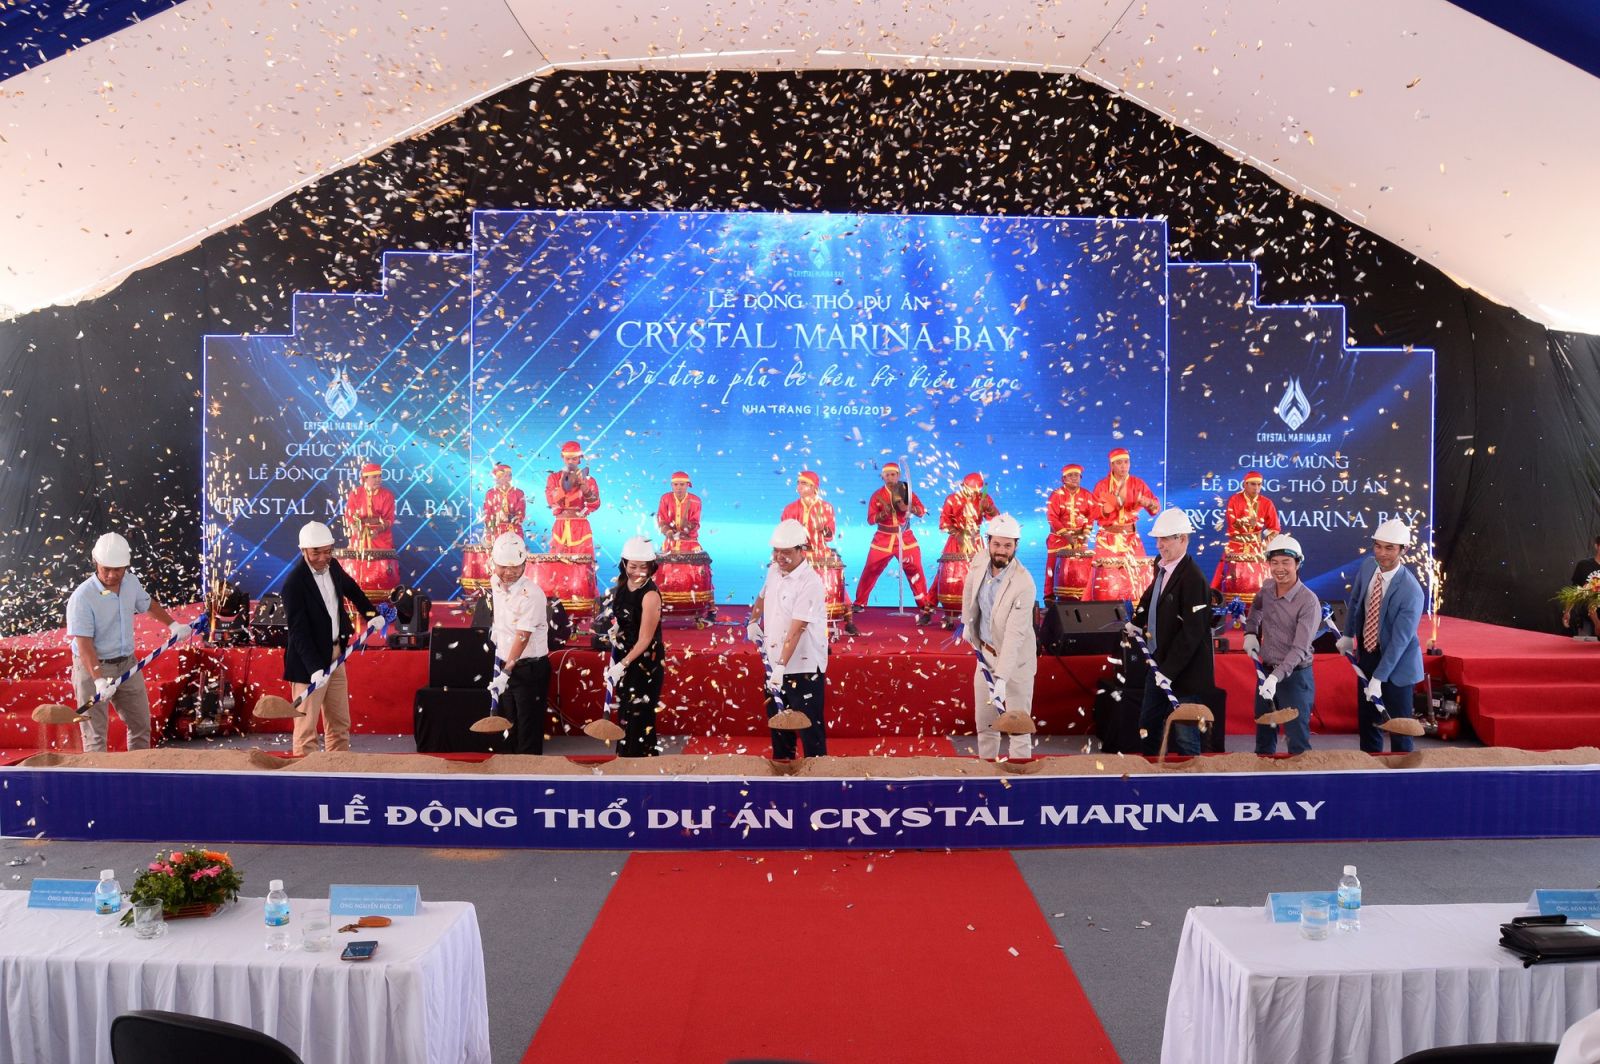 The groundbreaking ceremony of Crystal Marina Bay complex on May 26, 2019.